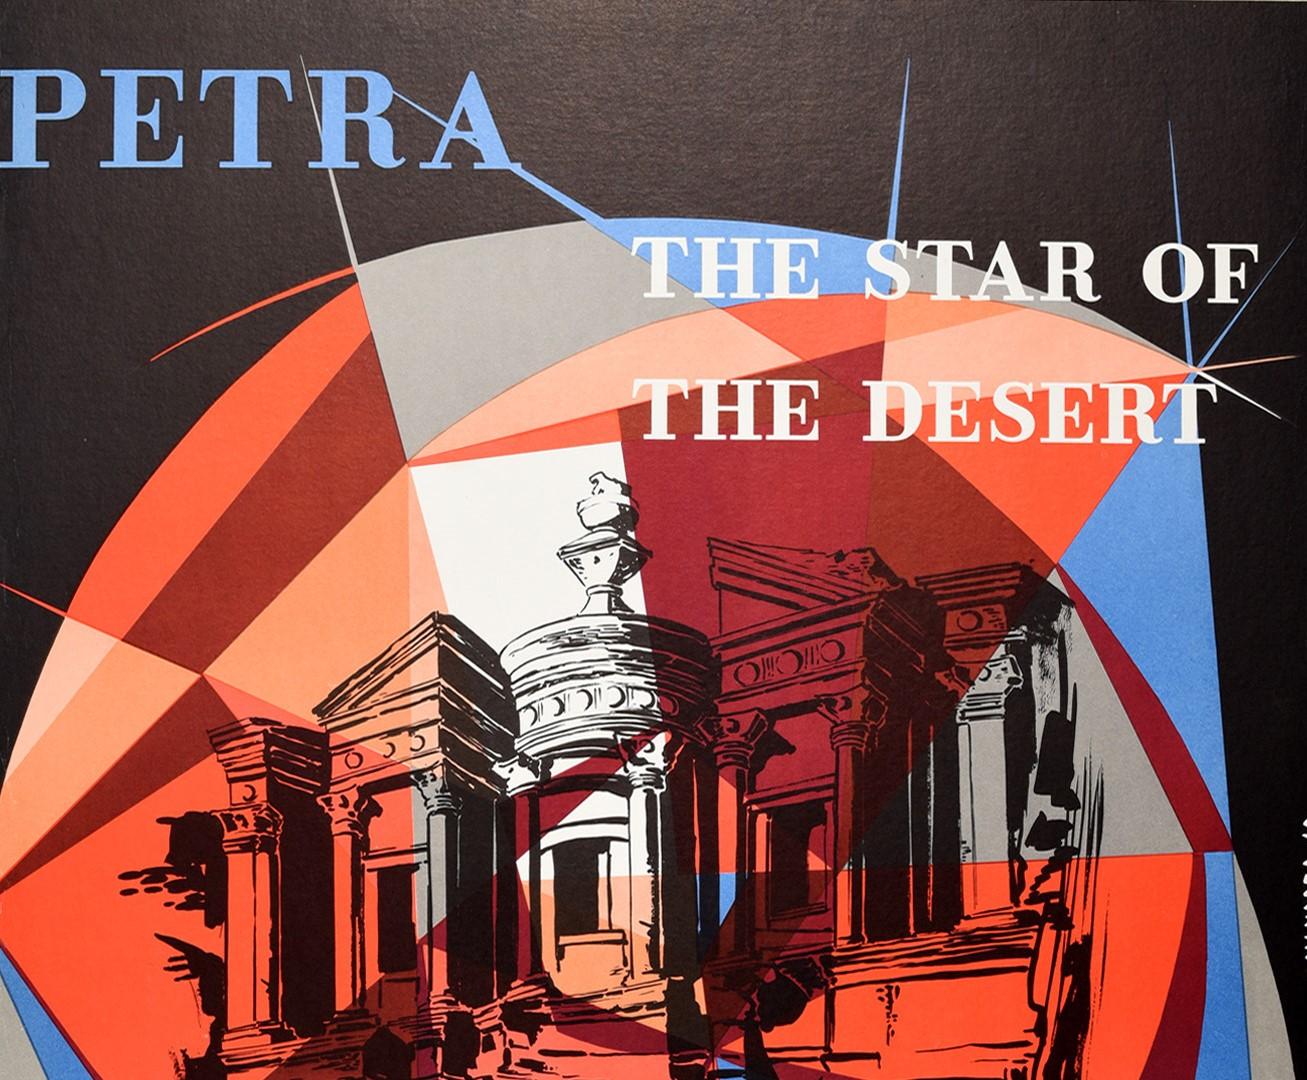 Original vintage travel poster for Petra The Star of the Desert Jordan The Holy Land issued by the Jordan Tourism Authority featuring a great design of the historic archaeological site of Petra set within colourful shapes against a black background.